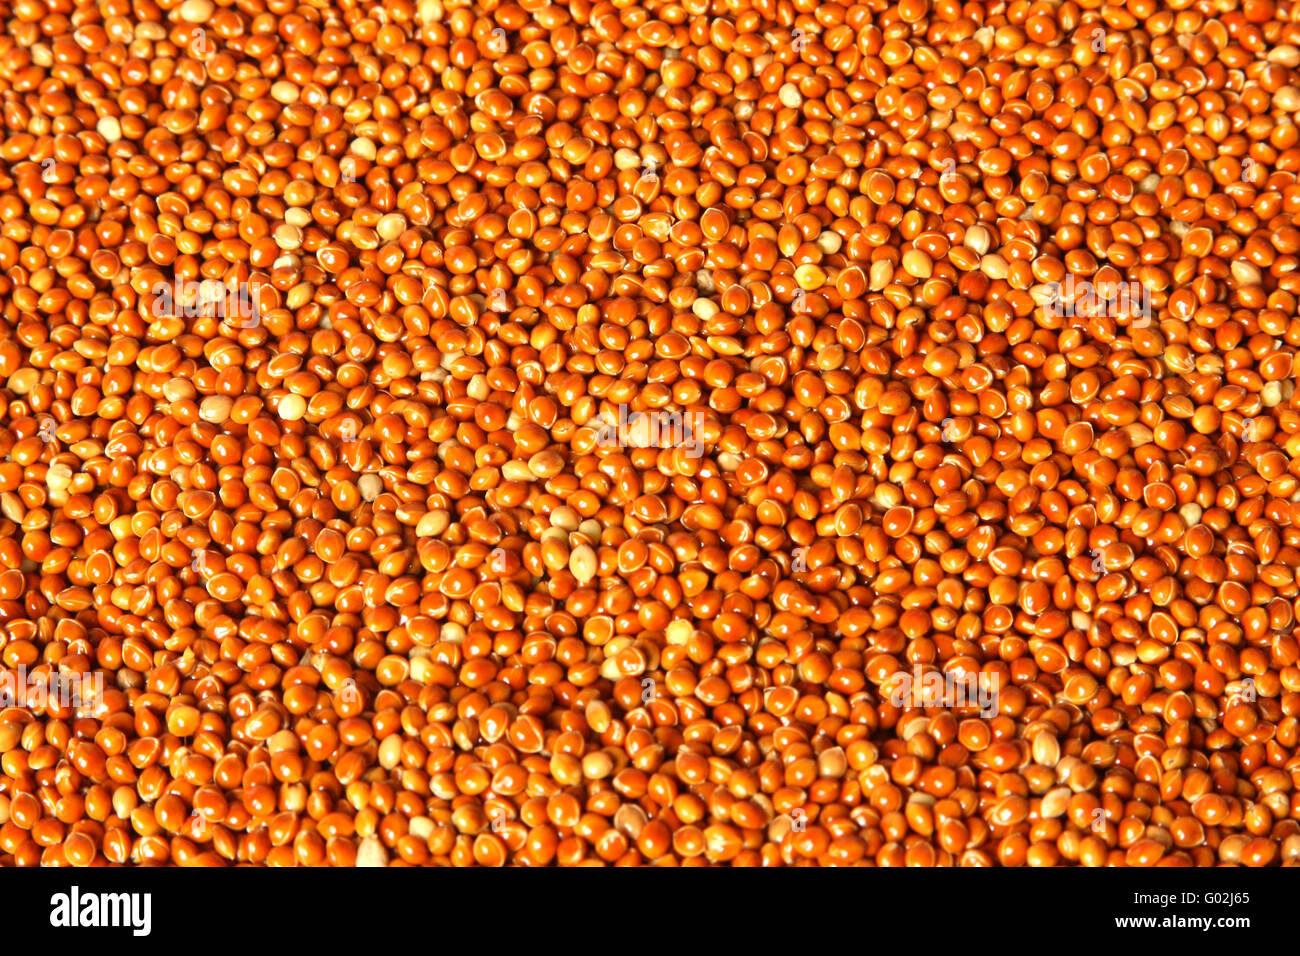 A texture of red millet seeds (Panicum miliaceum) Stock Photo